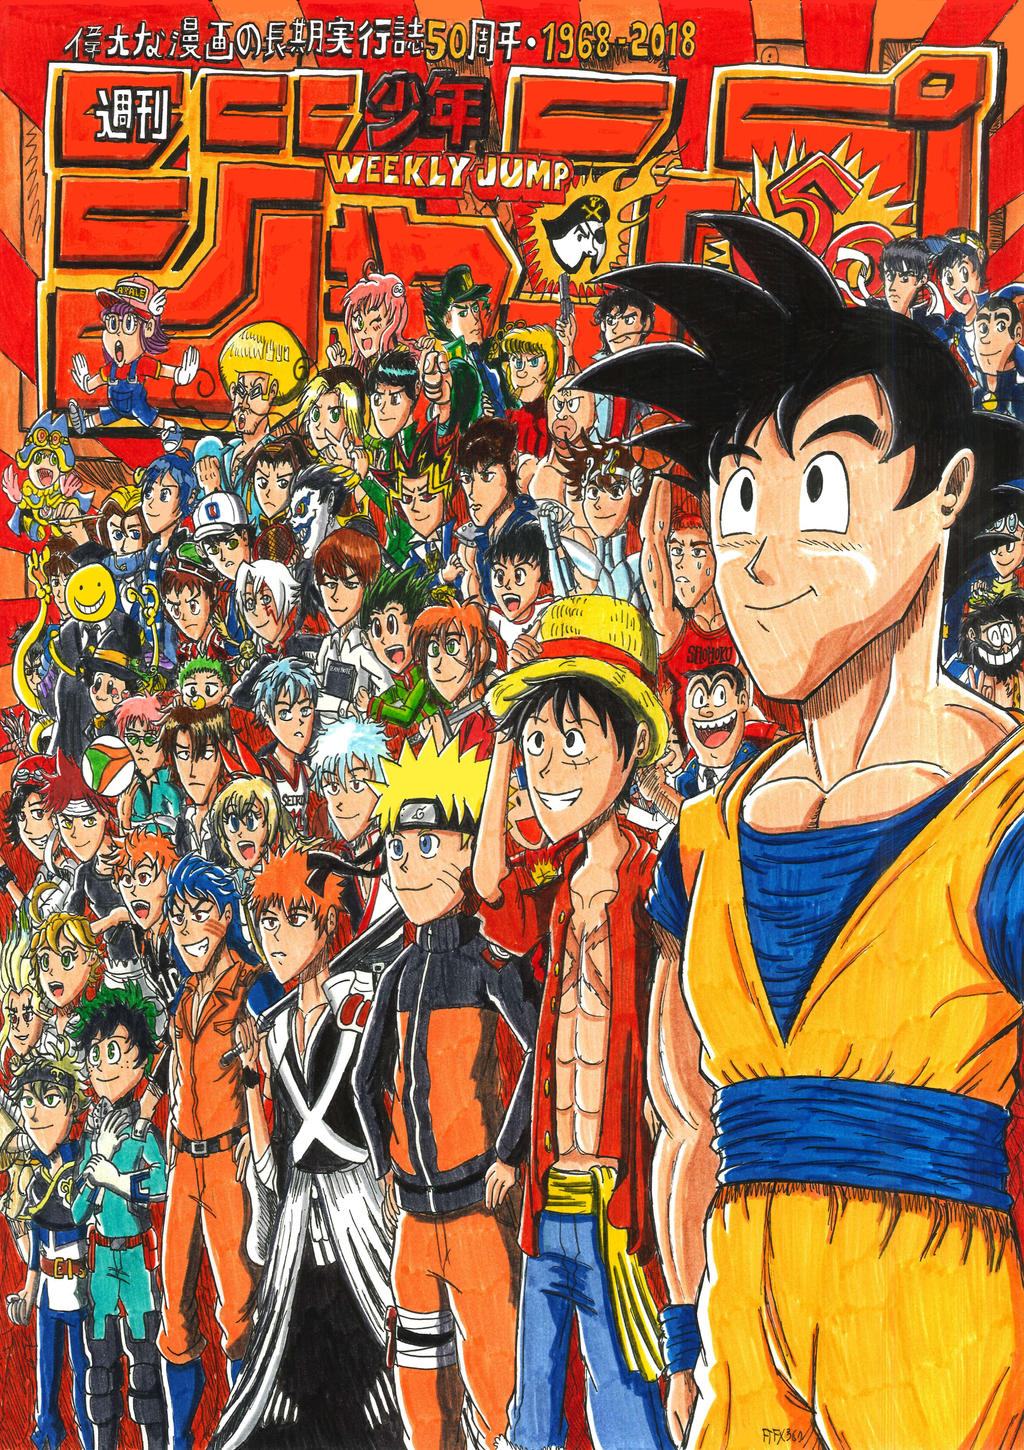 Weekly Shonen Jump - My 50th Anniversary Edition by ...